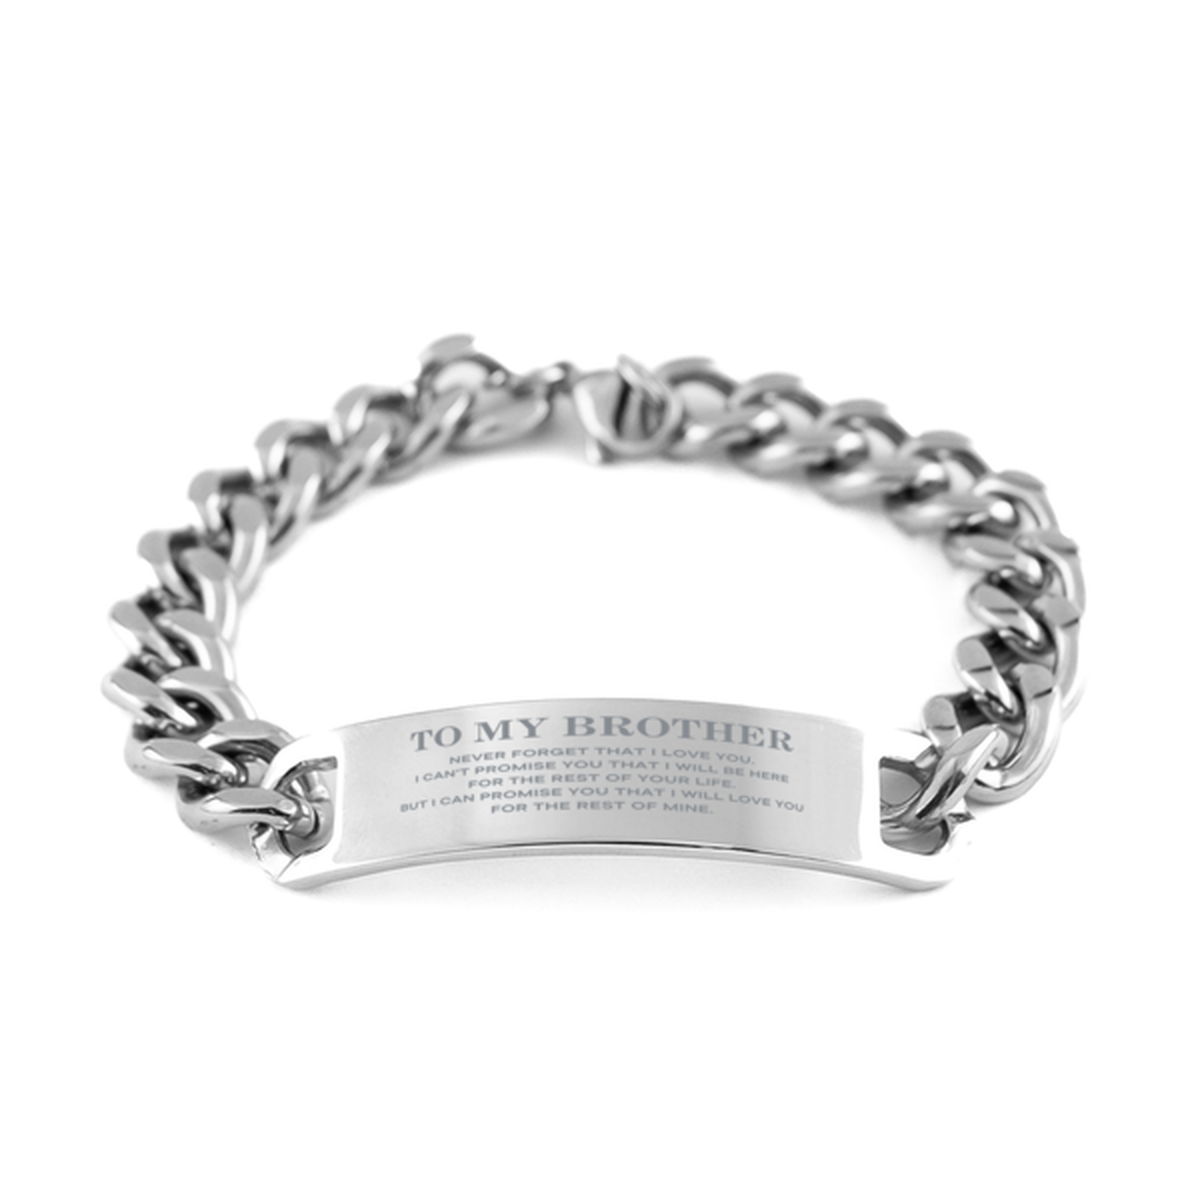 To My Brother Gifts, I will love you for the rest of mine, Love Brother Bracelet, Birthday Christmas Unique Cuban Chain Stainless Steel Bracelet For Brother